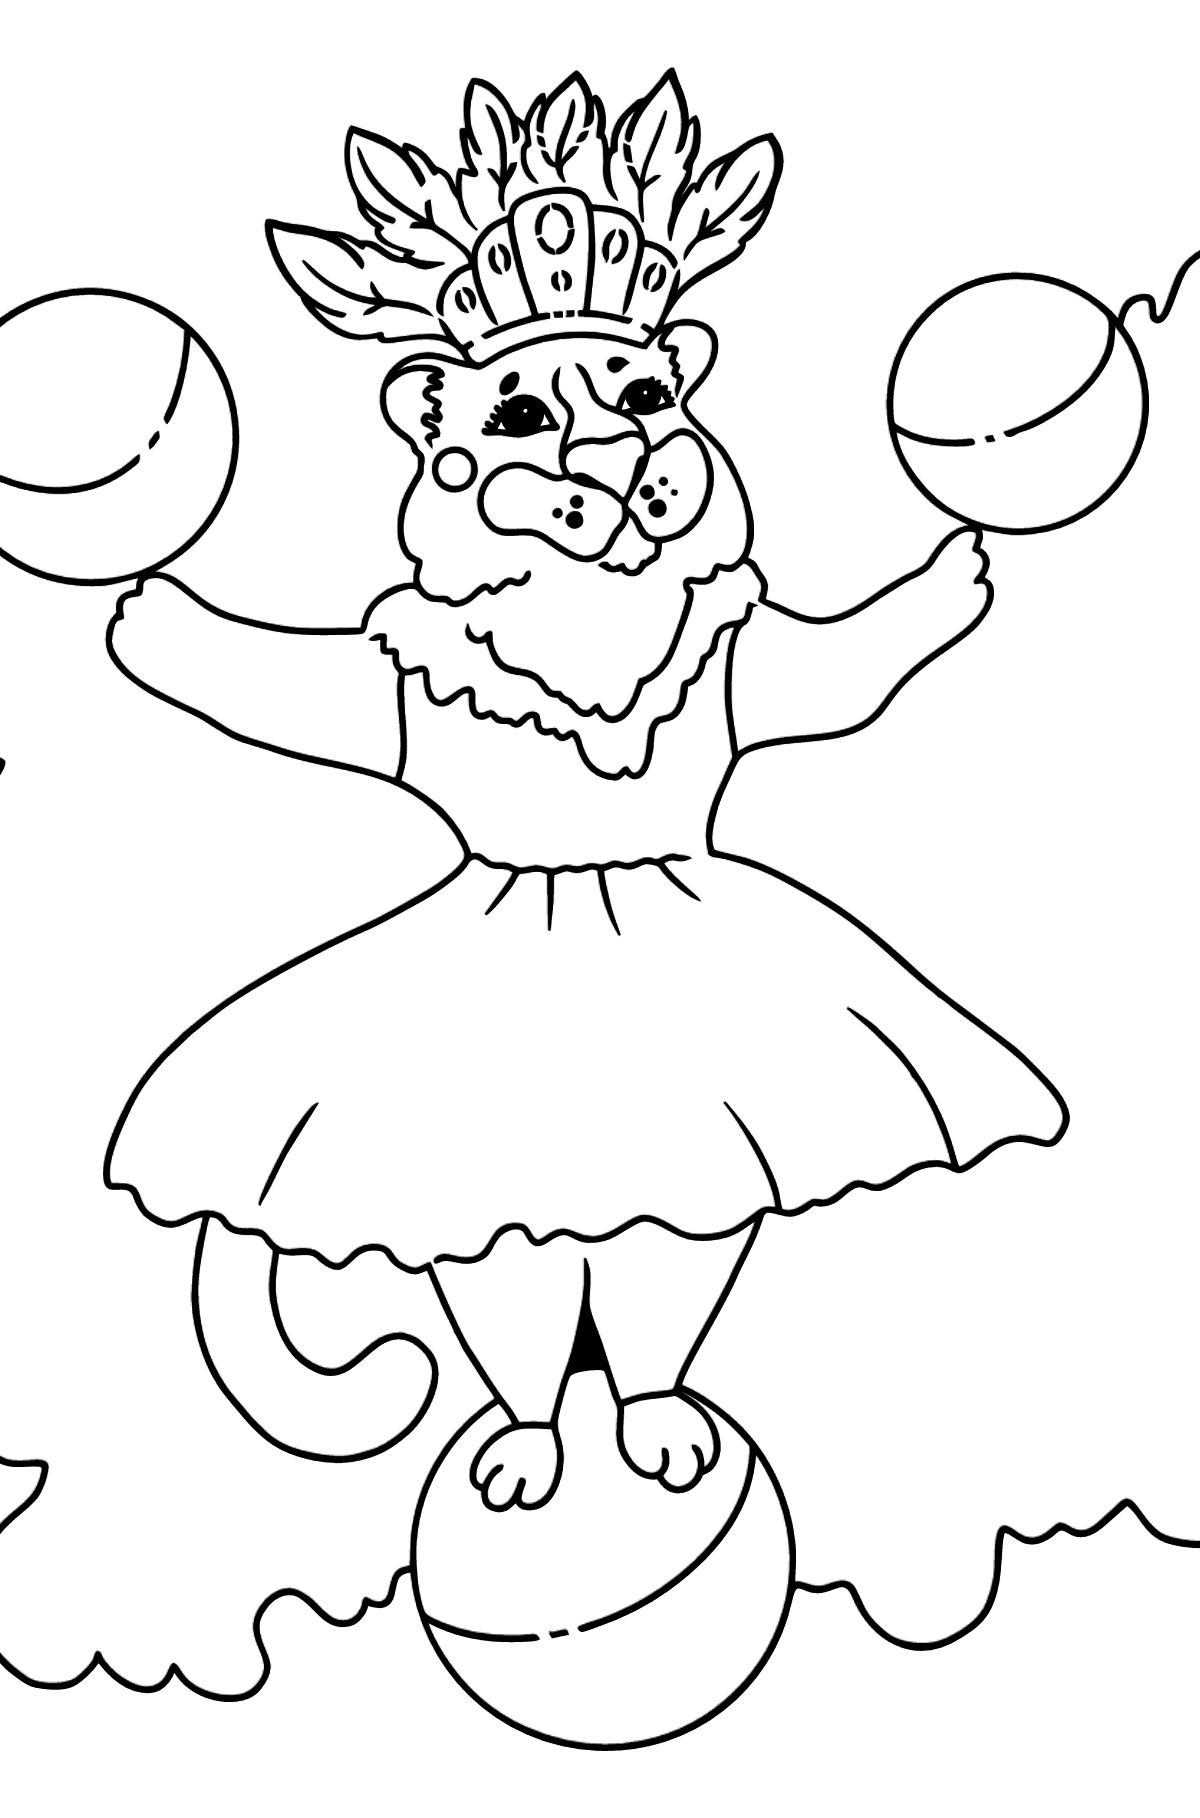 Coloring Page - A Tigress with Three Balls - Coloring Pages for Kids